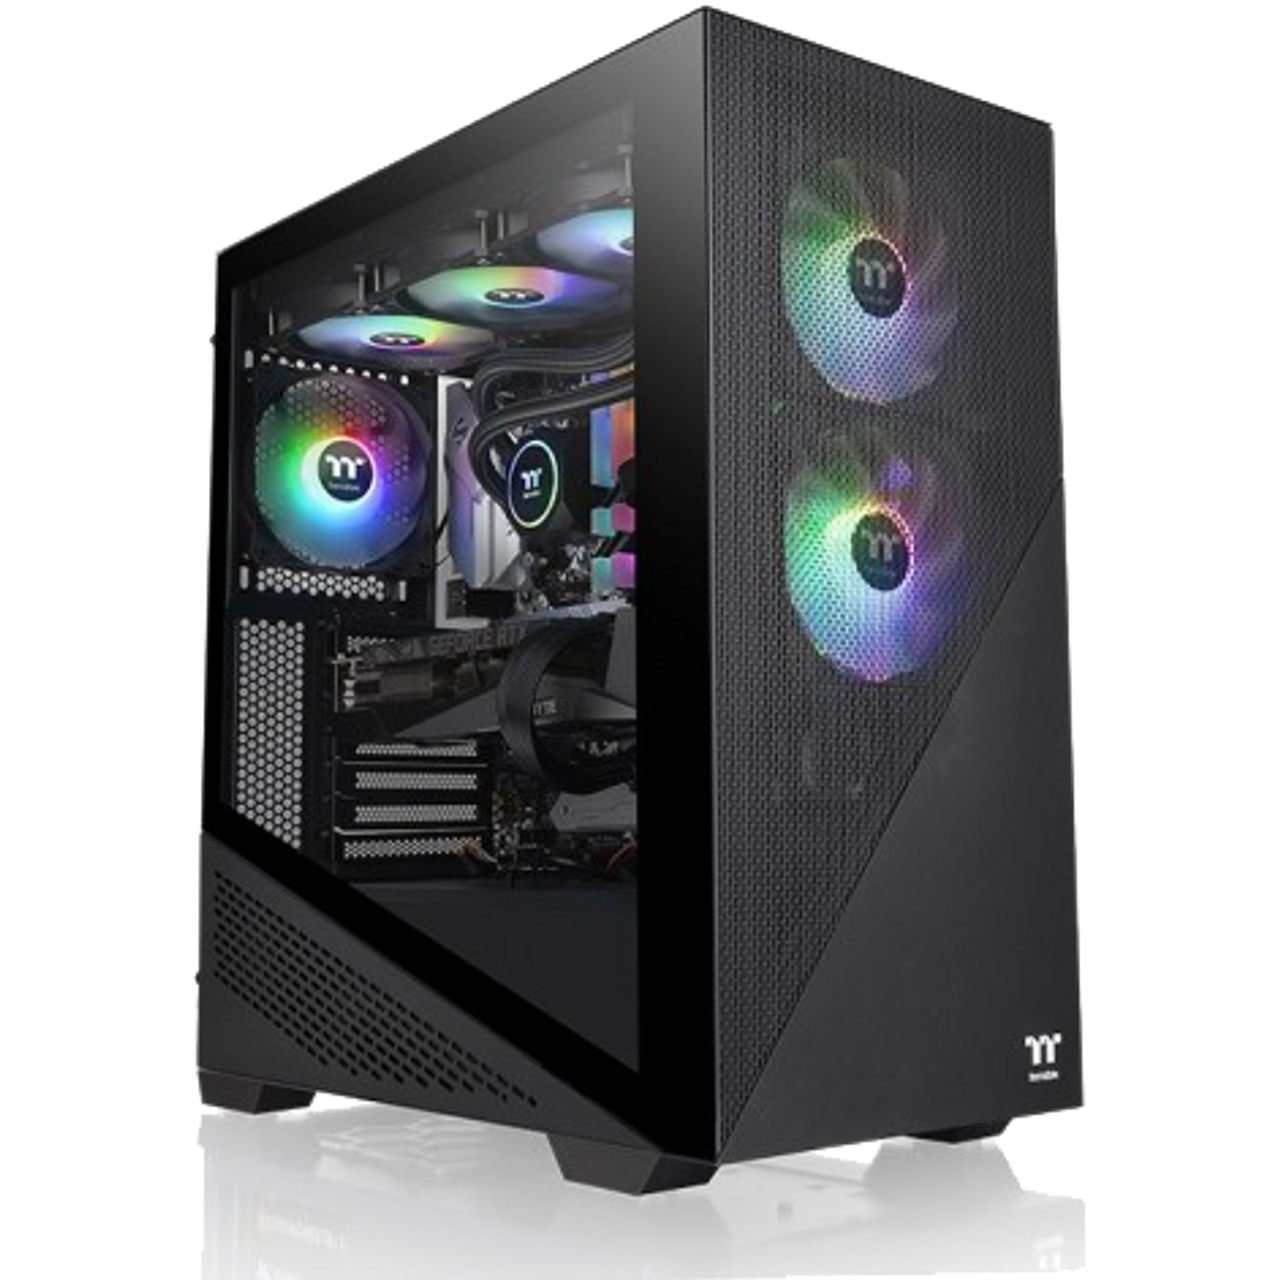 Thermaltake-Divider-370-Tempered-Glass-ARGB-Mid-Tower-Case-Black-Edition